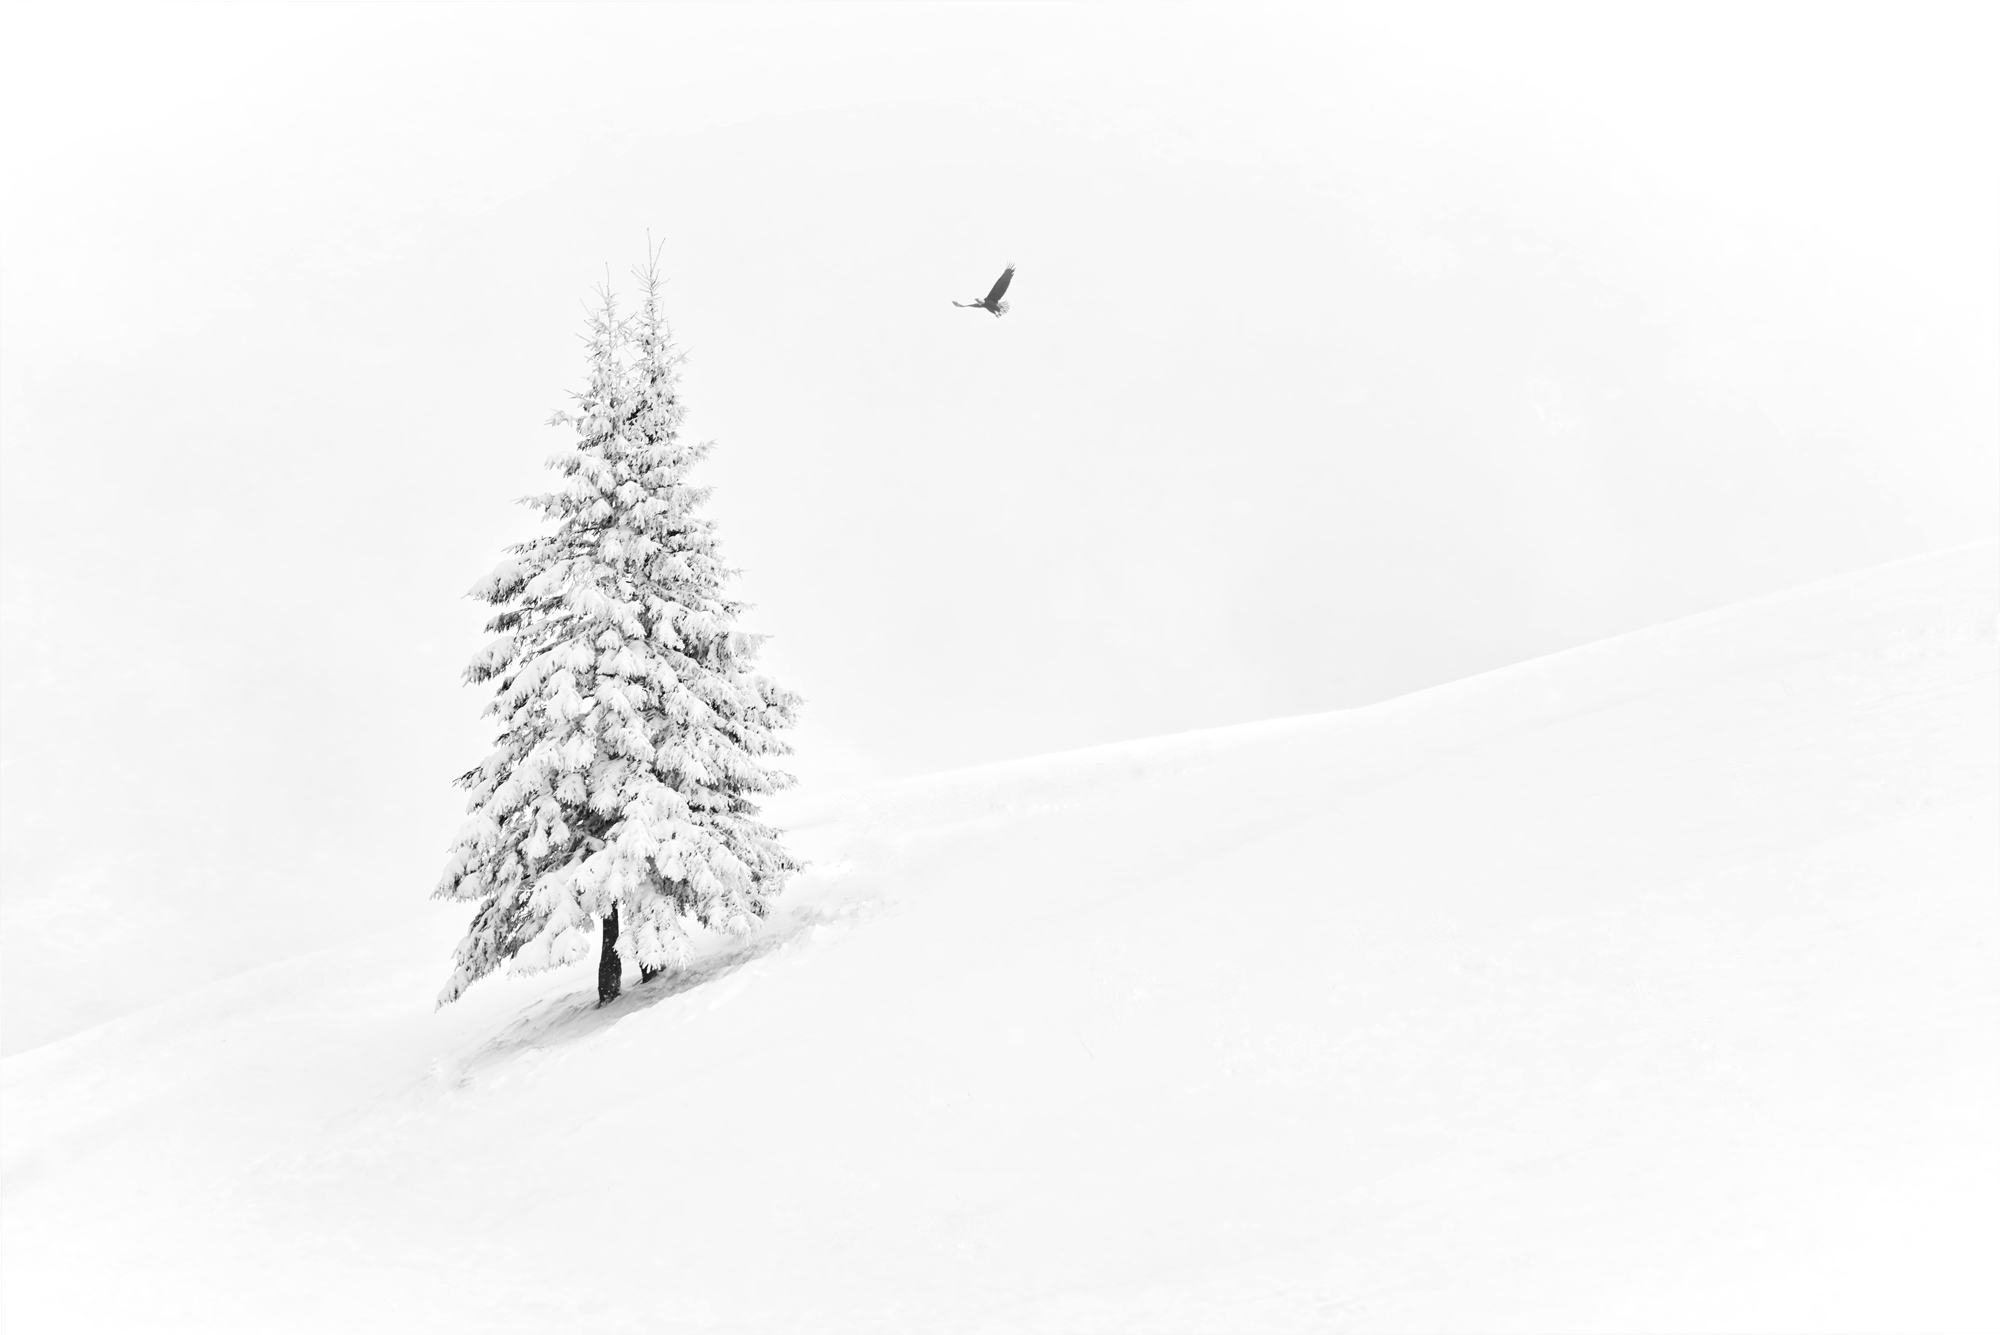 Ideas to Inspire Your Wintertime Photography